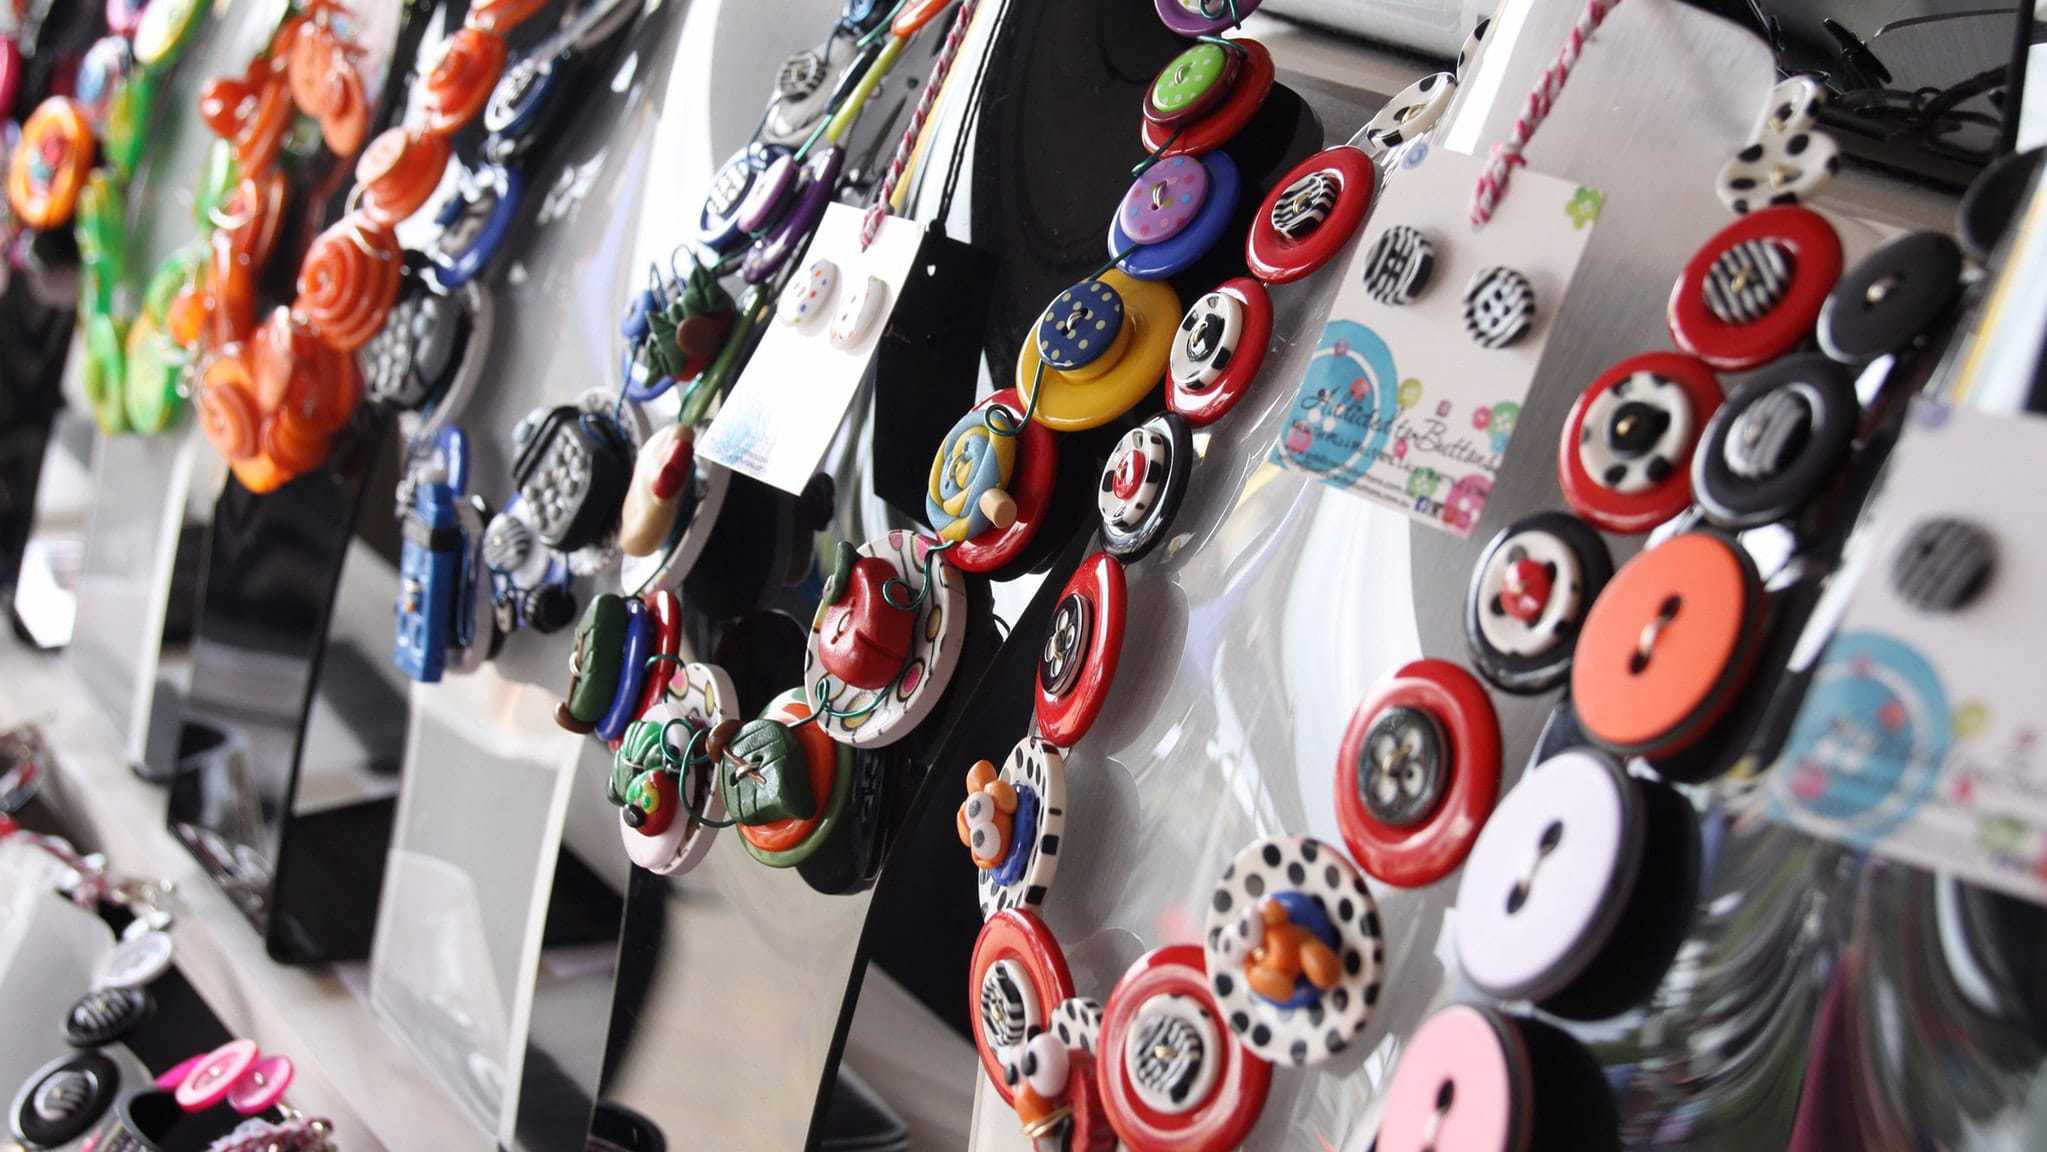 Addicted to Buttons are a regular stallholder at their monthly market in Ipswich.